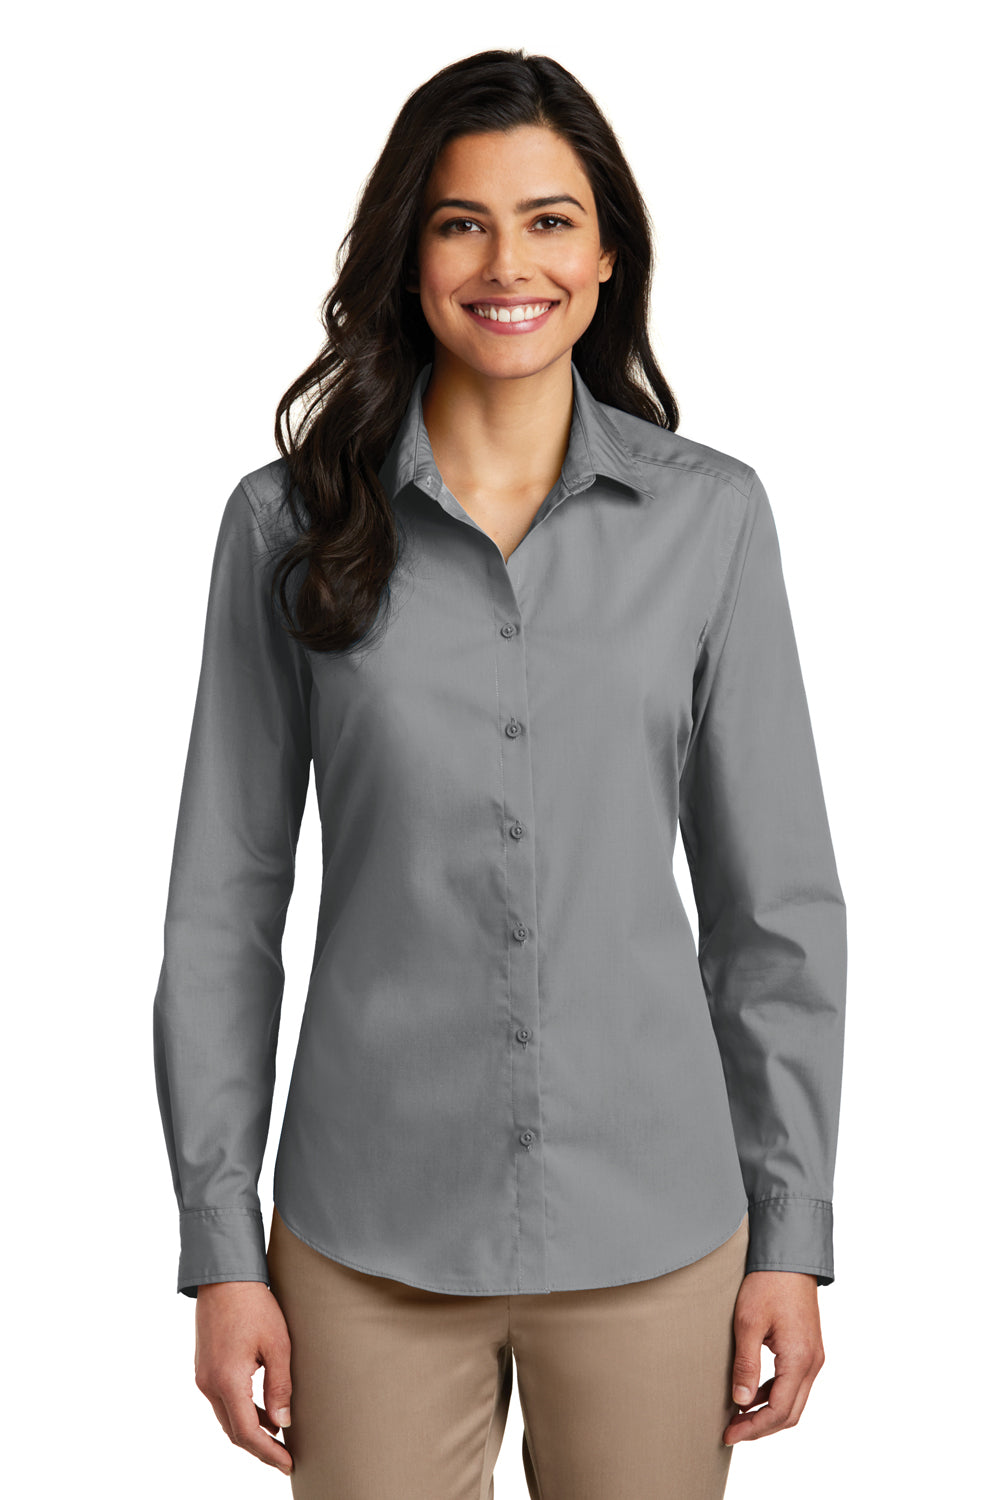 Port Authority LW100 Womens Carefree Stain Resistant Long Sleeve Button Down Shirt Gusty Grey Front